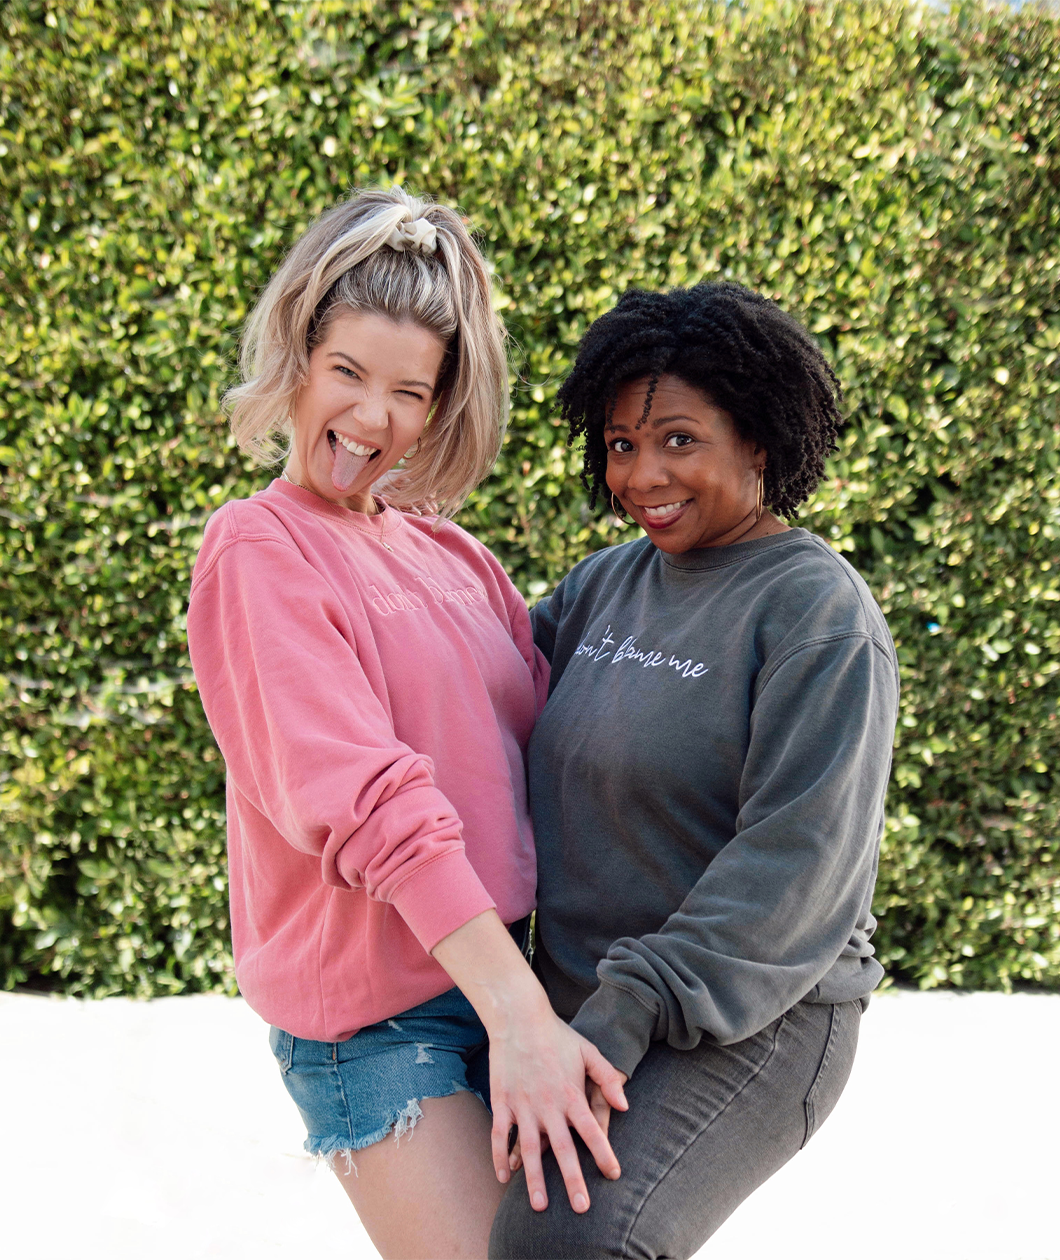 Meghan Rienks modeling a pink crewneck sweatshirt with “don’t blame me” across the chest in pink serif font and Melisa Monts modeling a gray crewneck sweatshirt with “don’t blame me” across chest in white cursive font - from Don’t Blame Me